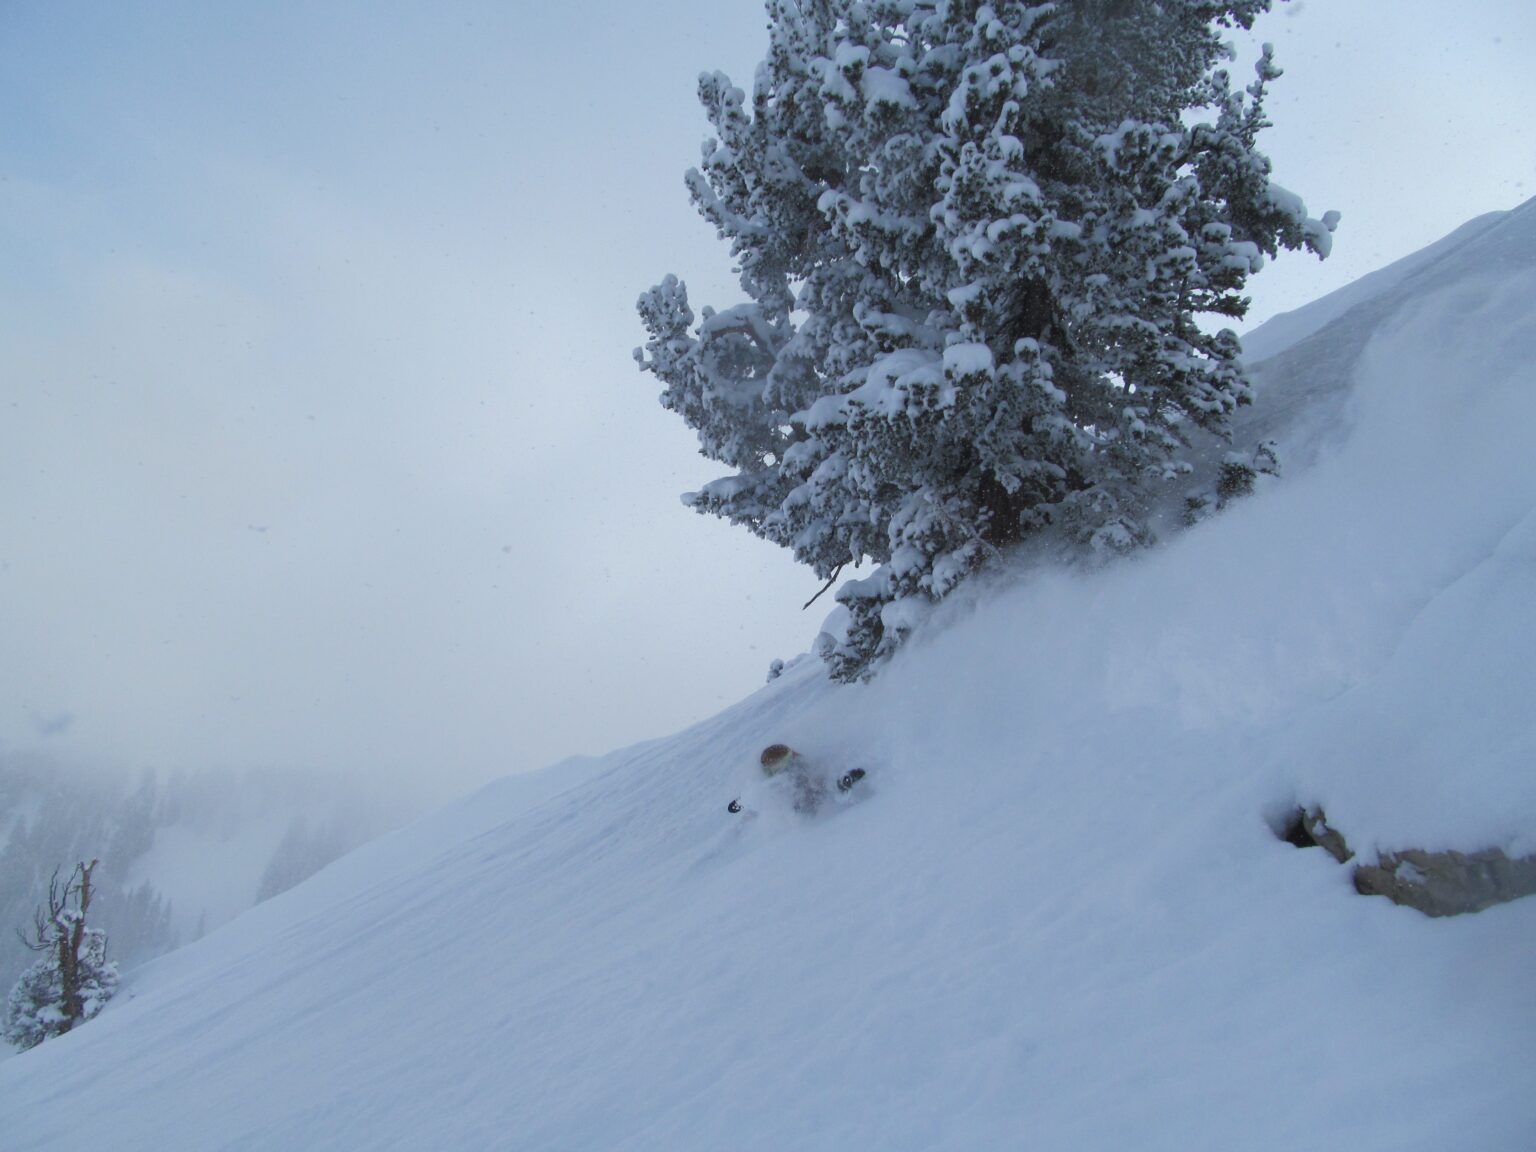 Finding waist deep powder snow while snowboarding the East face of Mount Raymond